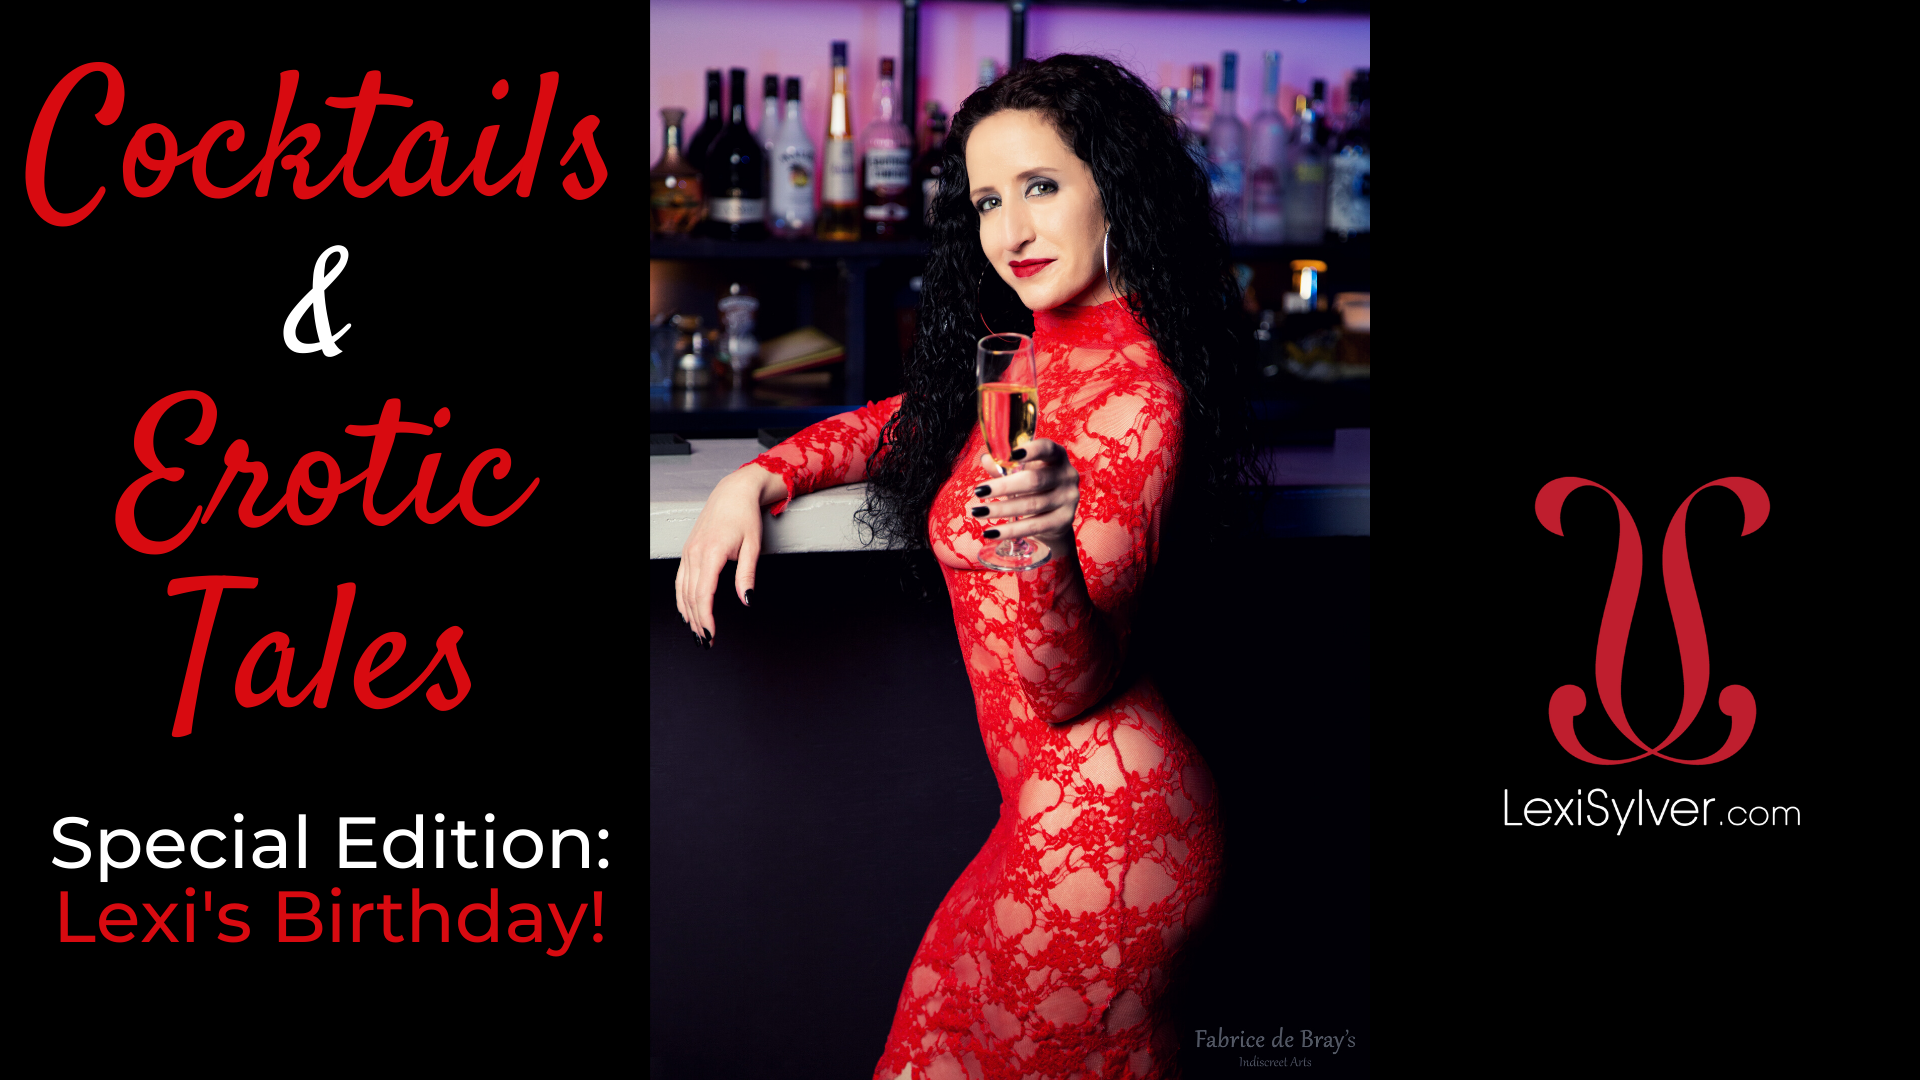 Celebrate My Birthday at Cocktails & Erotic Tales!